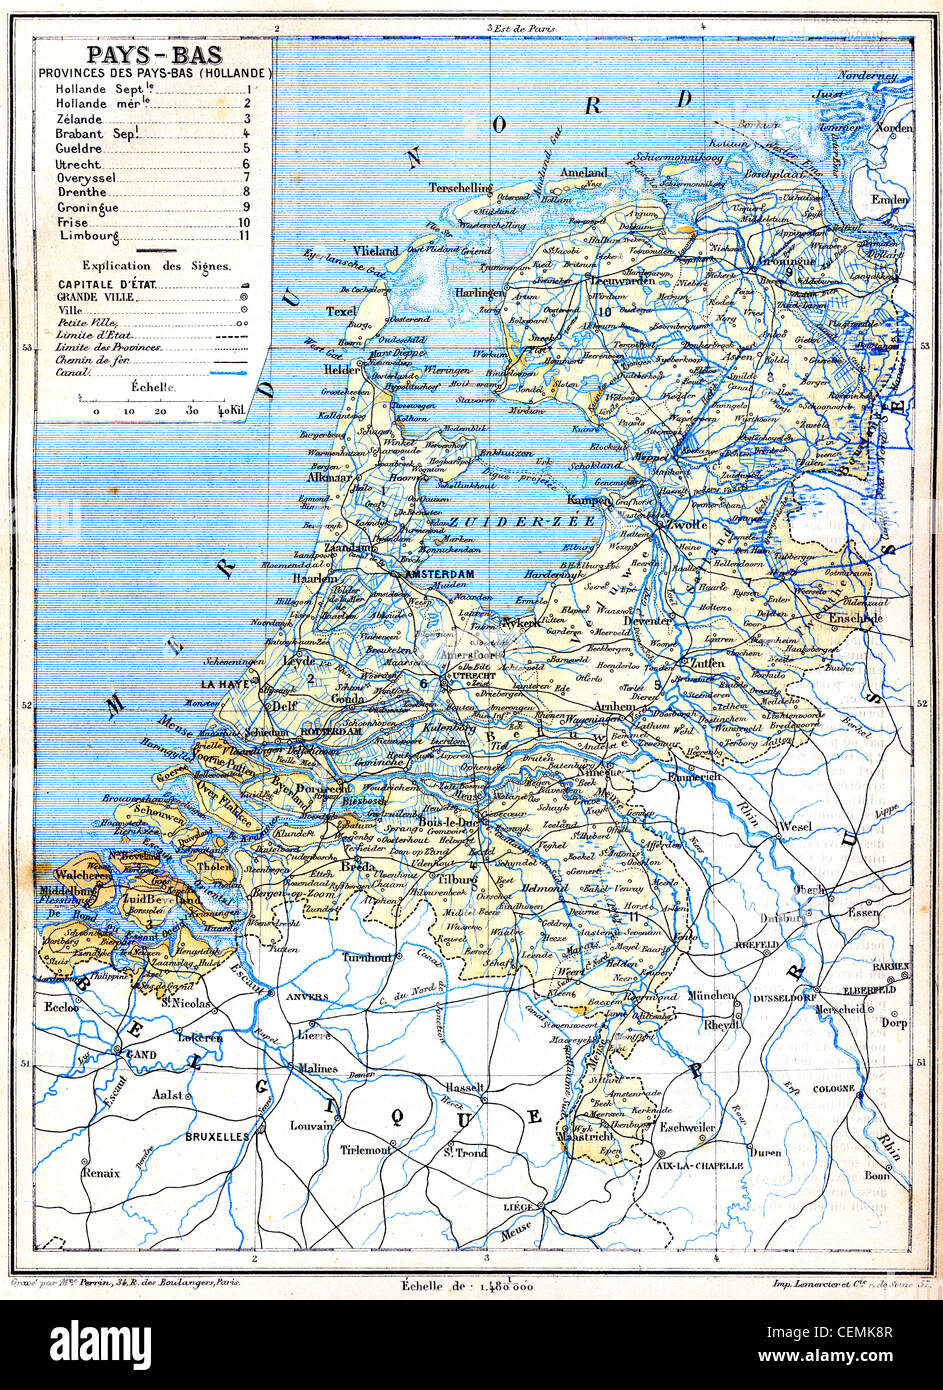 The map of Netherlands with explanation of signs on map. Stock Photo